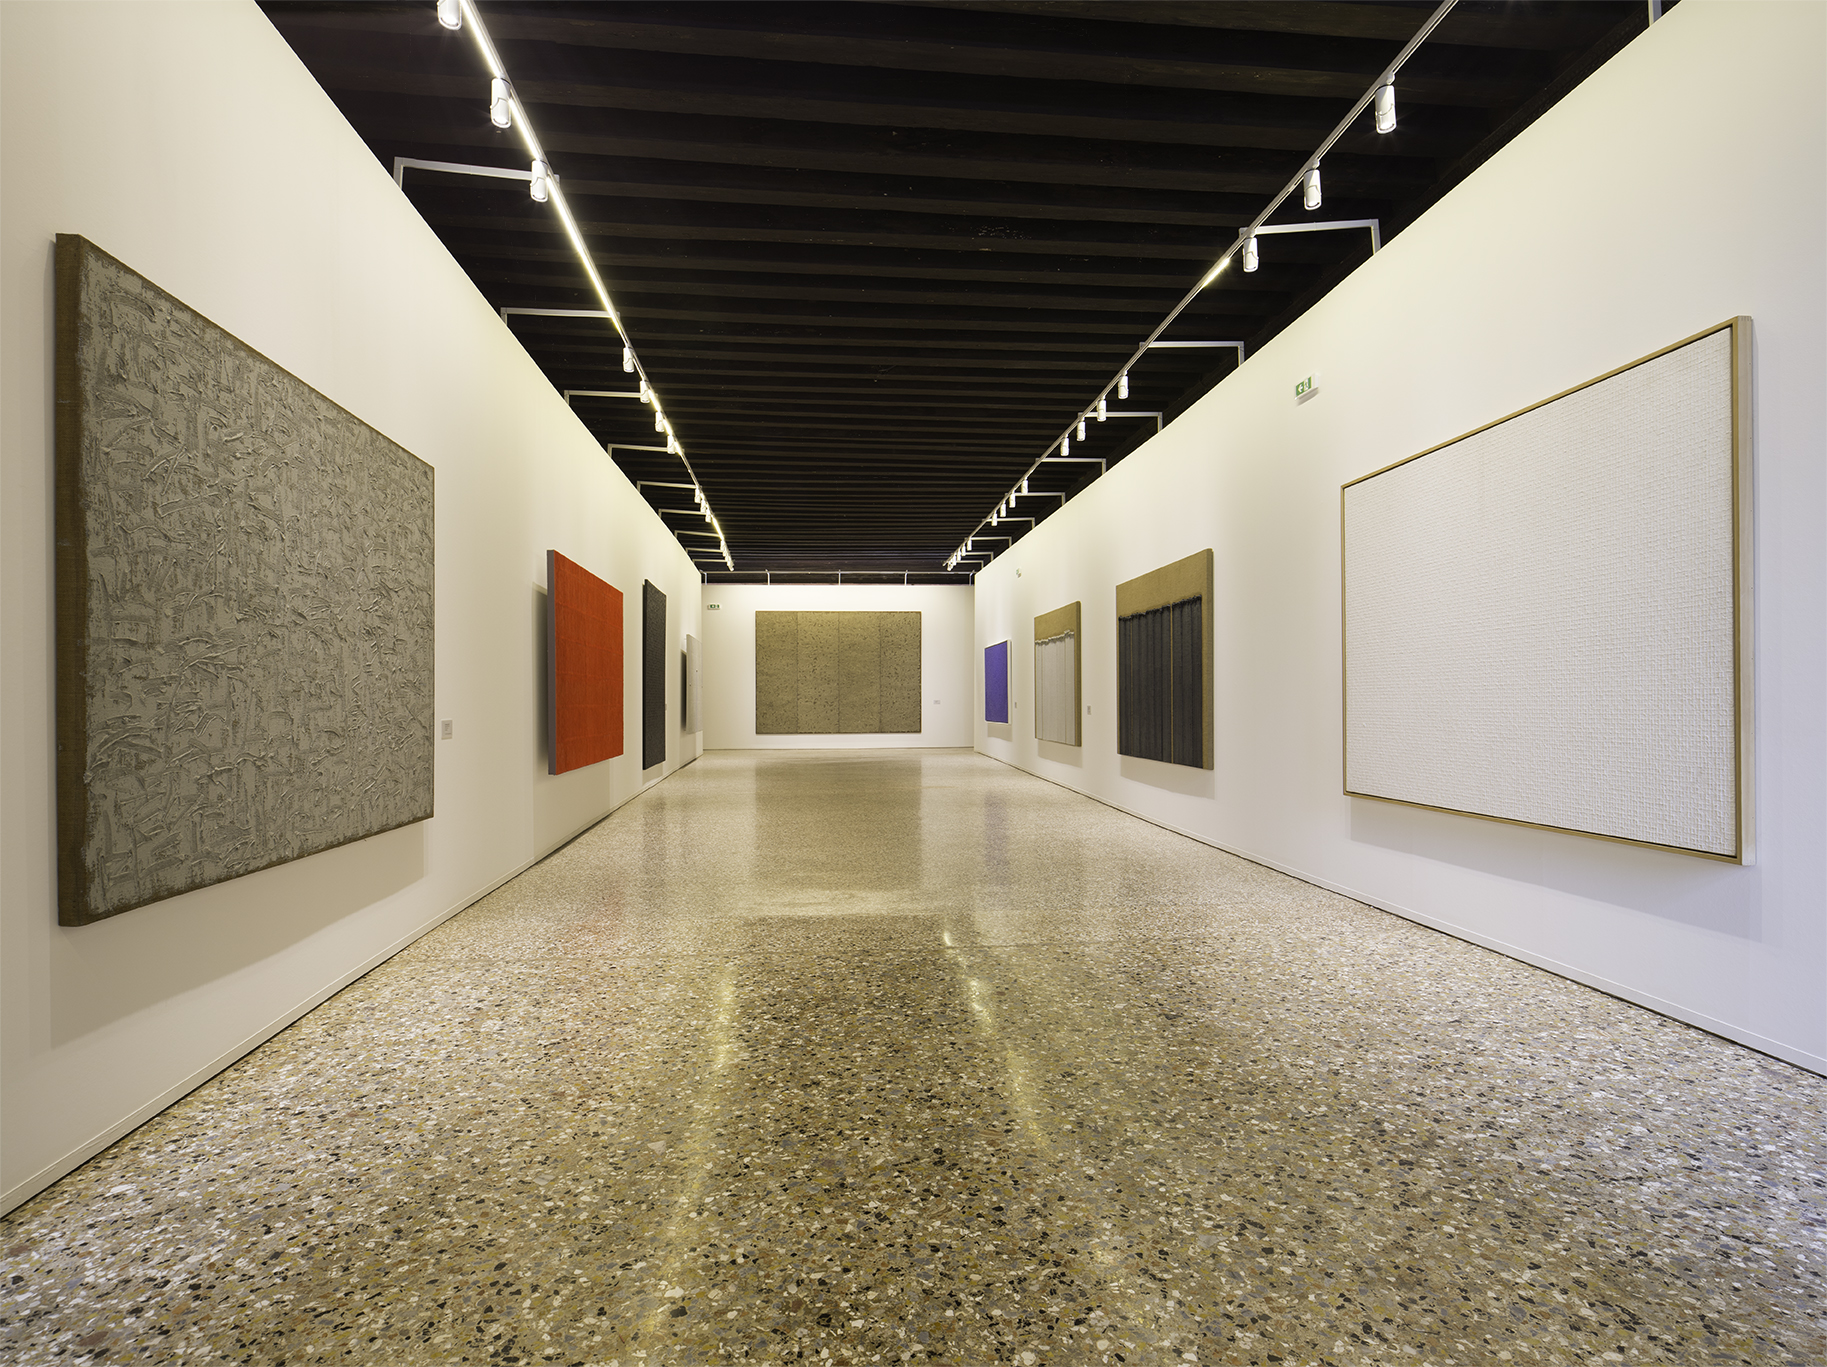 Installation View. Dansaekhwa, collateral event of the 56th International Art Exhibition - la Biennale di Venezia, 2015.  Photo by Fabrice Seixas. Image Provided by Kukje Gallery.